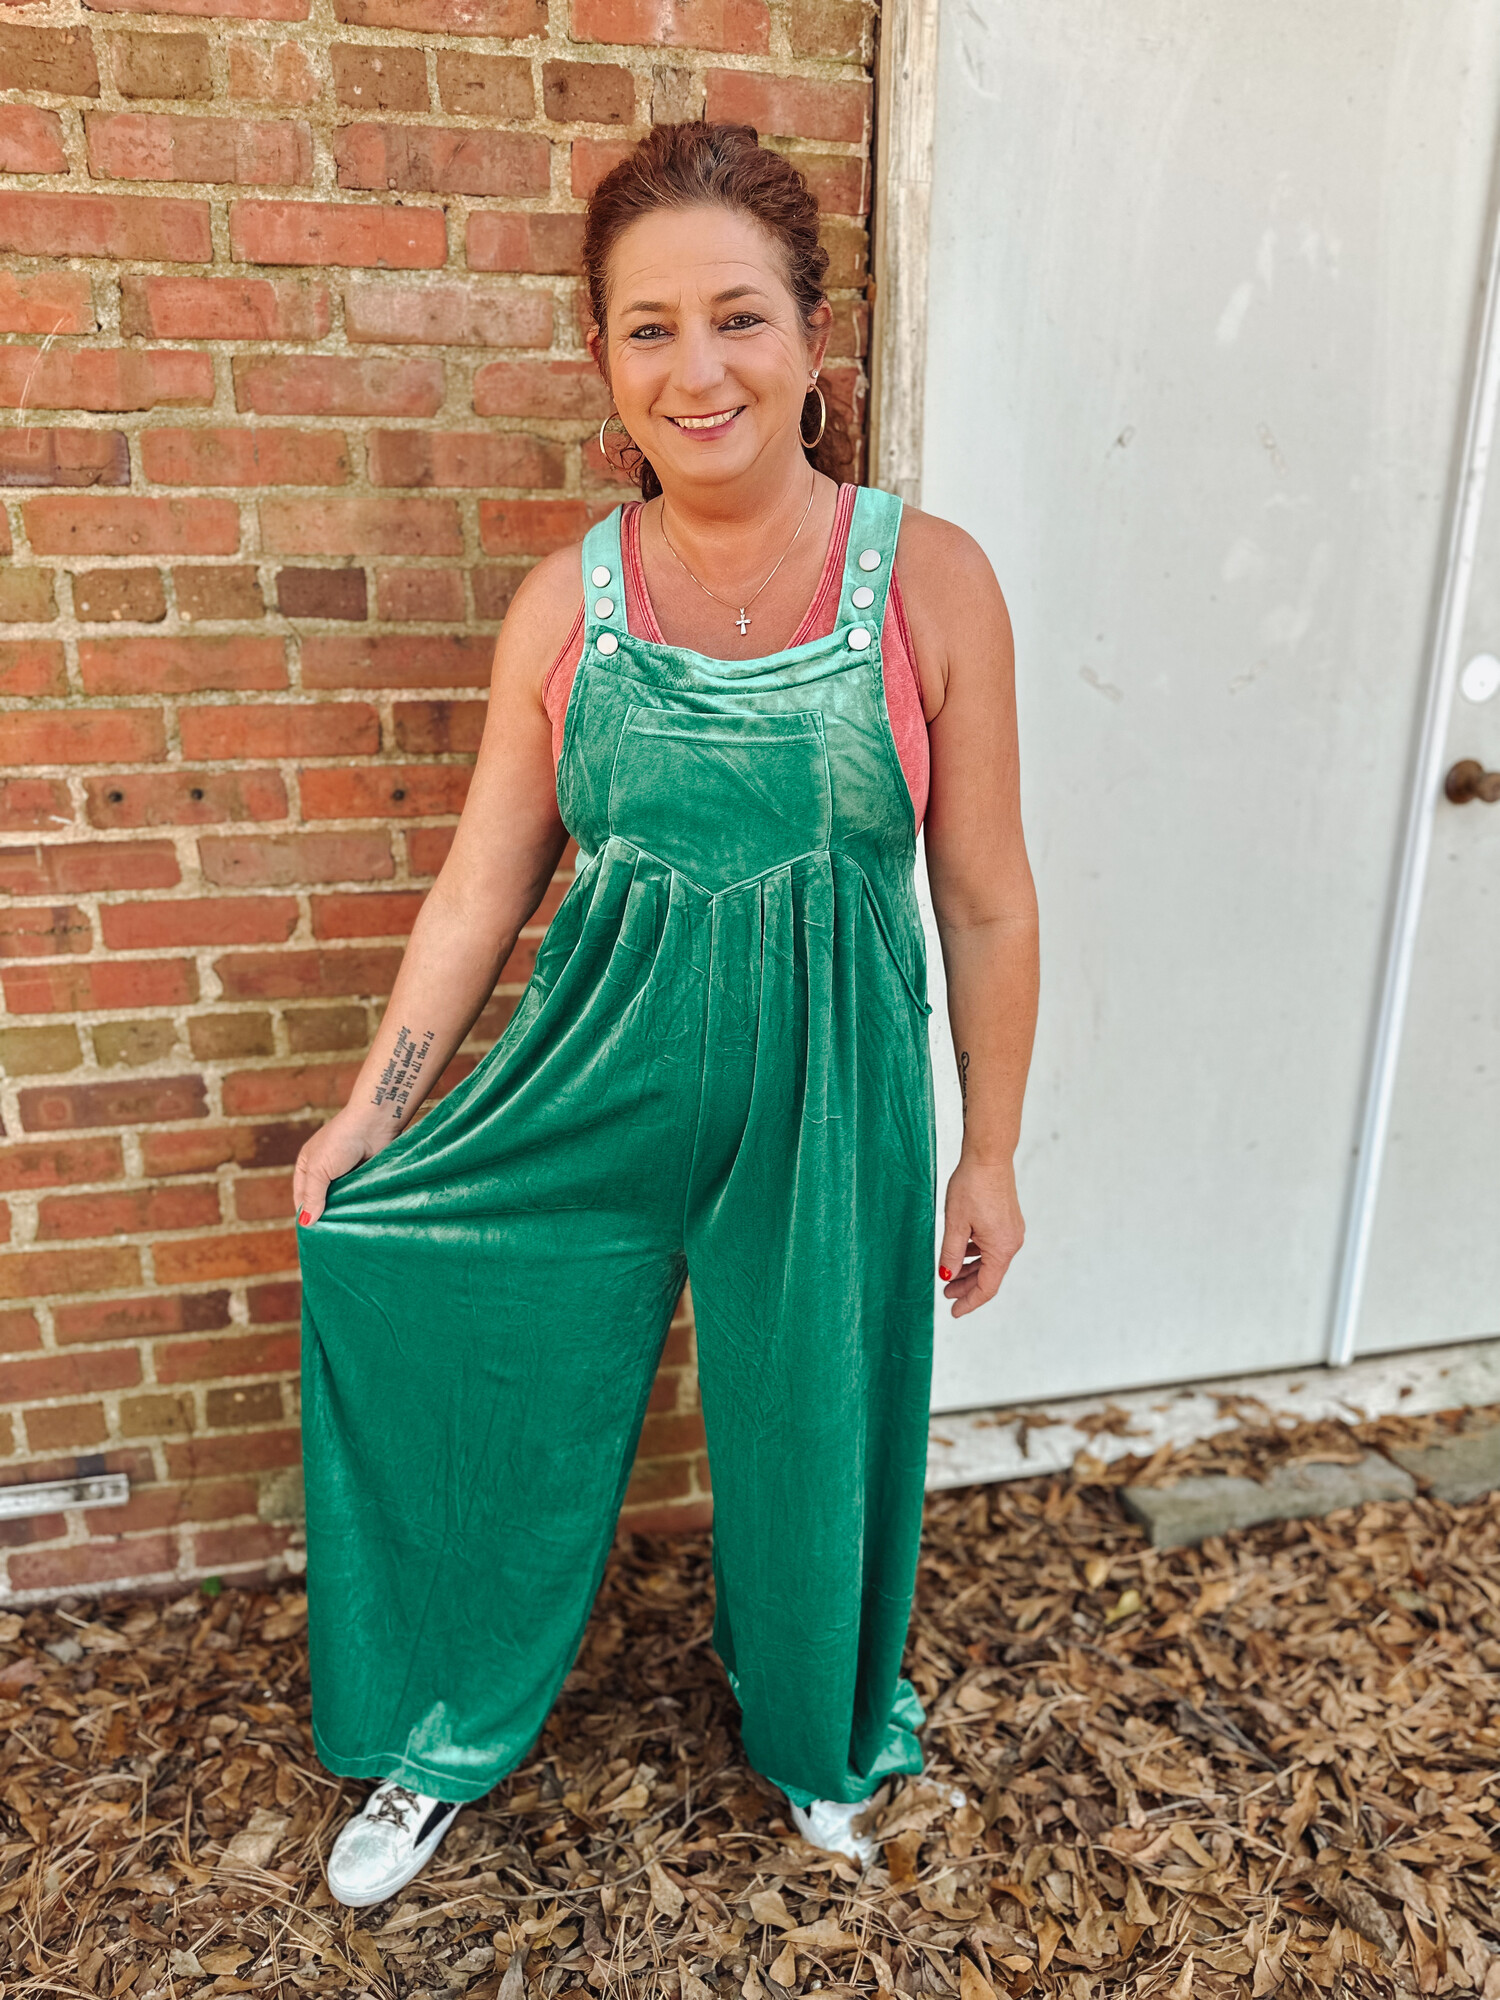 The perfect fit for cooler weather! Add a fedora hat and some jewelry and be the comfiest AND cutest one wherever you go!
These are meant to fit oversized, and come in sizes small through Xlarge!
Available in Chocolate and in Emerald!